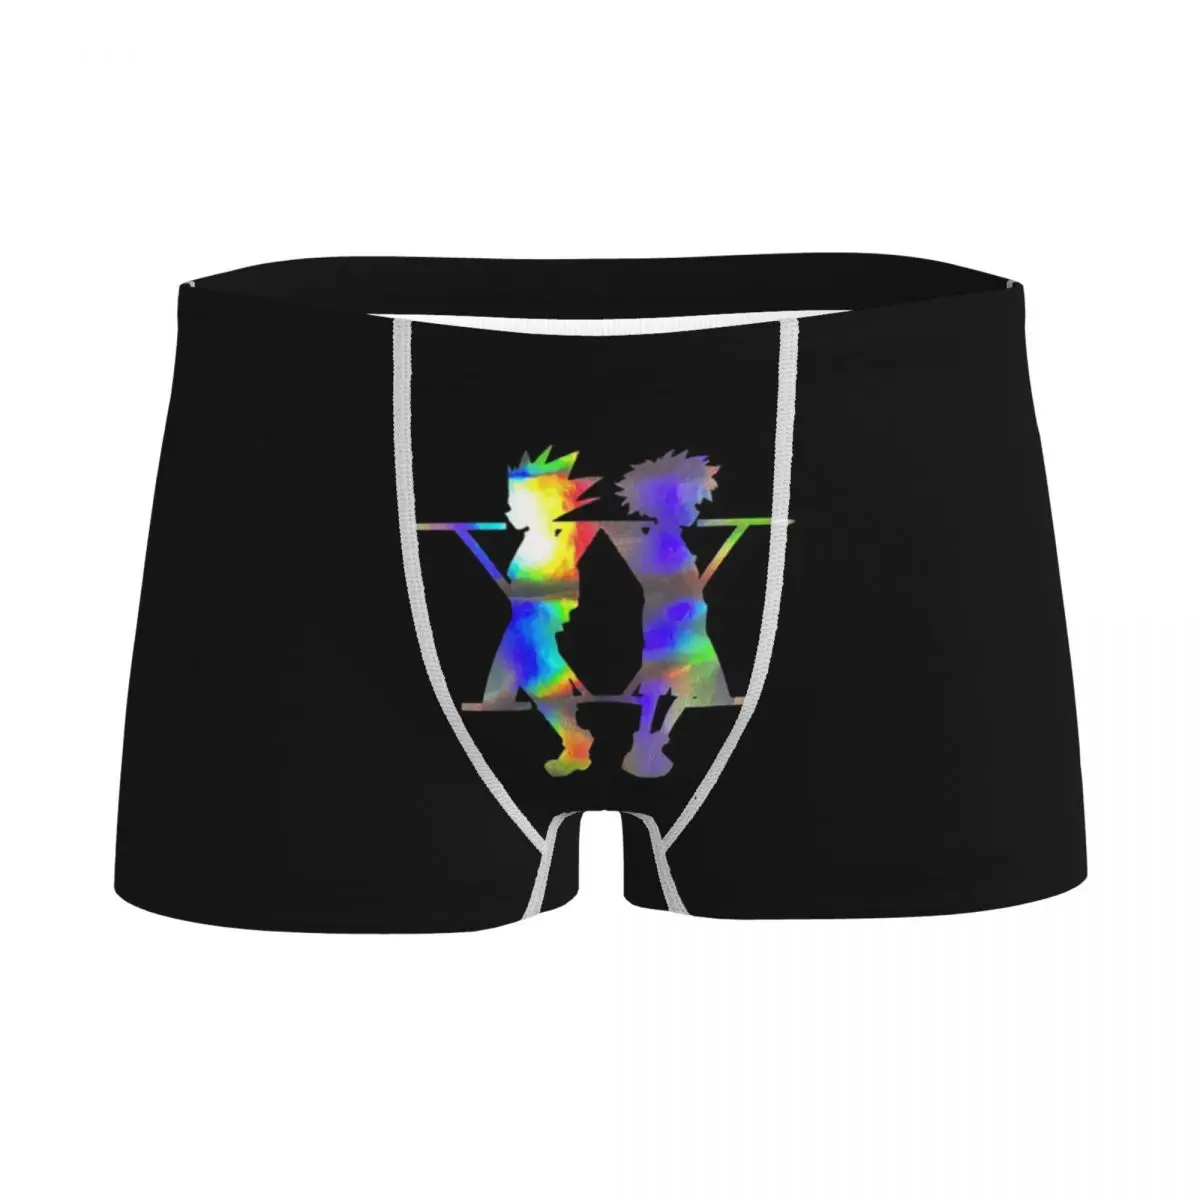 

Children's Boys Underwear Hunter X Hunter Japanese Anime Youth Shorts Panties Boxers Teenagers Cotton Underpants